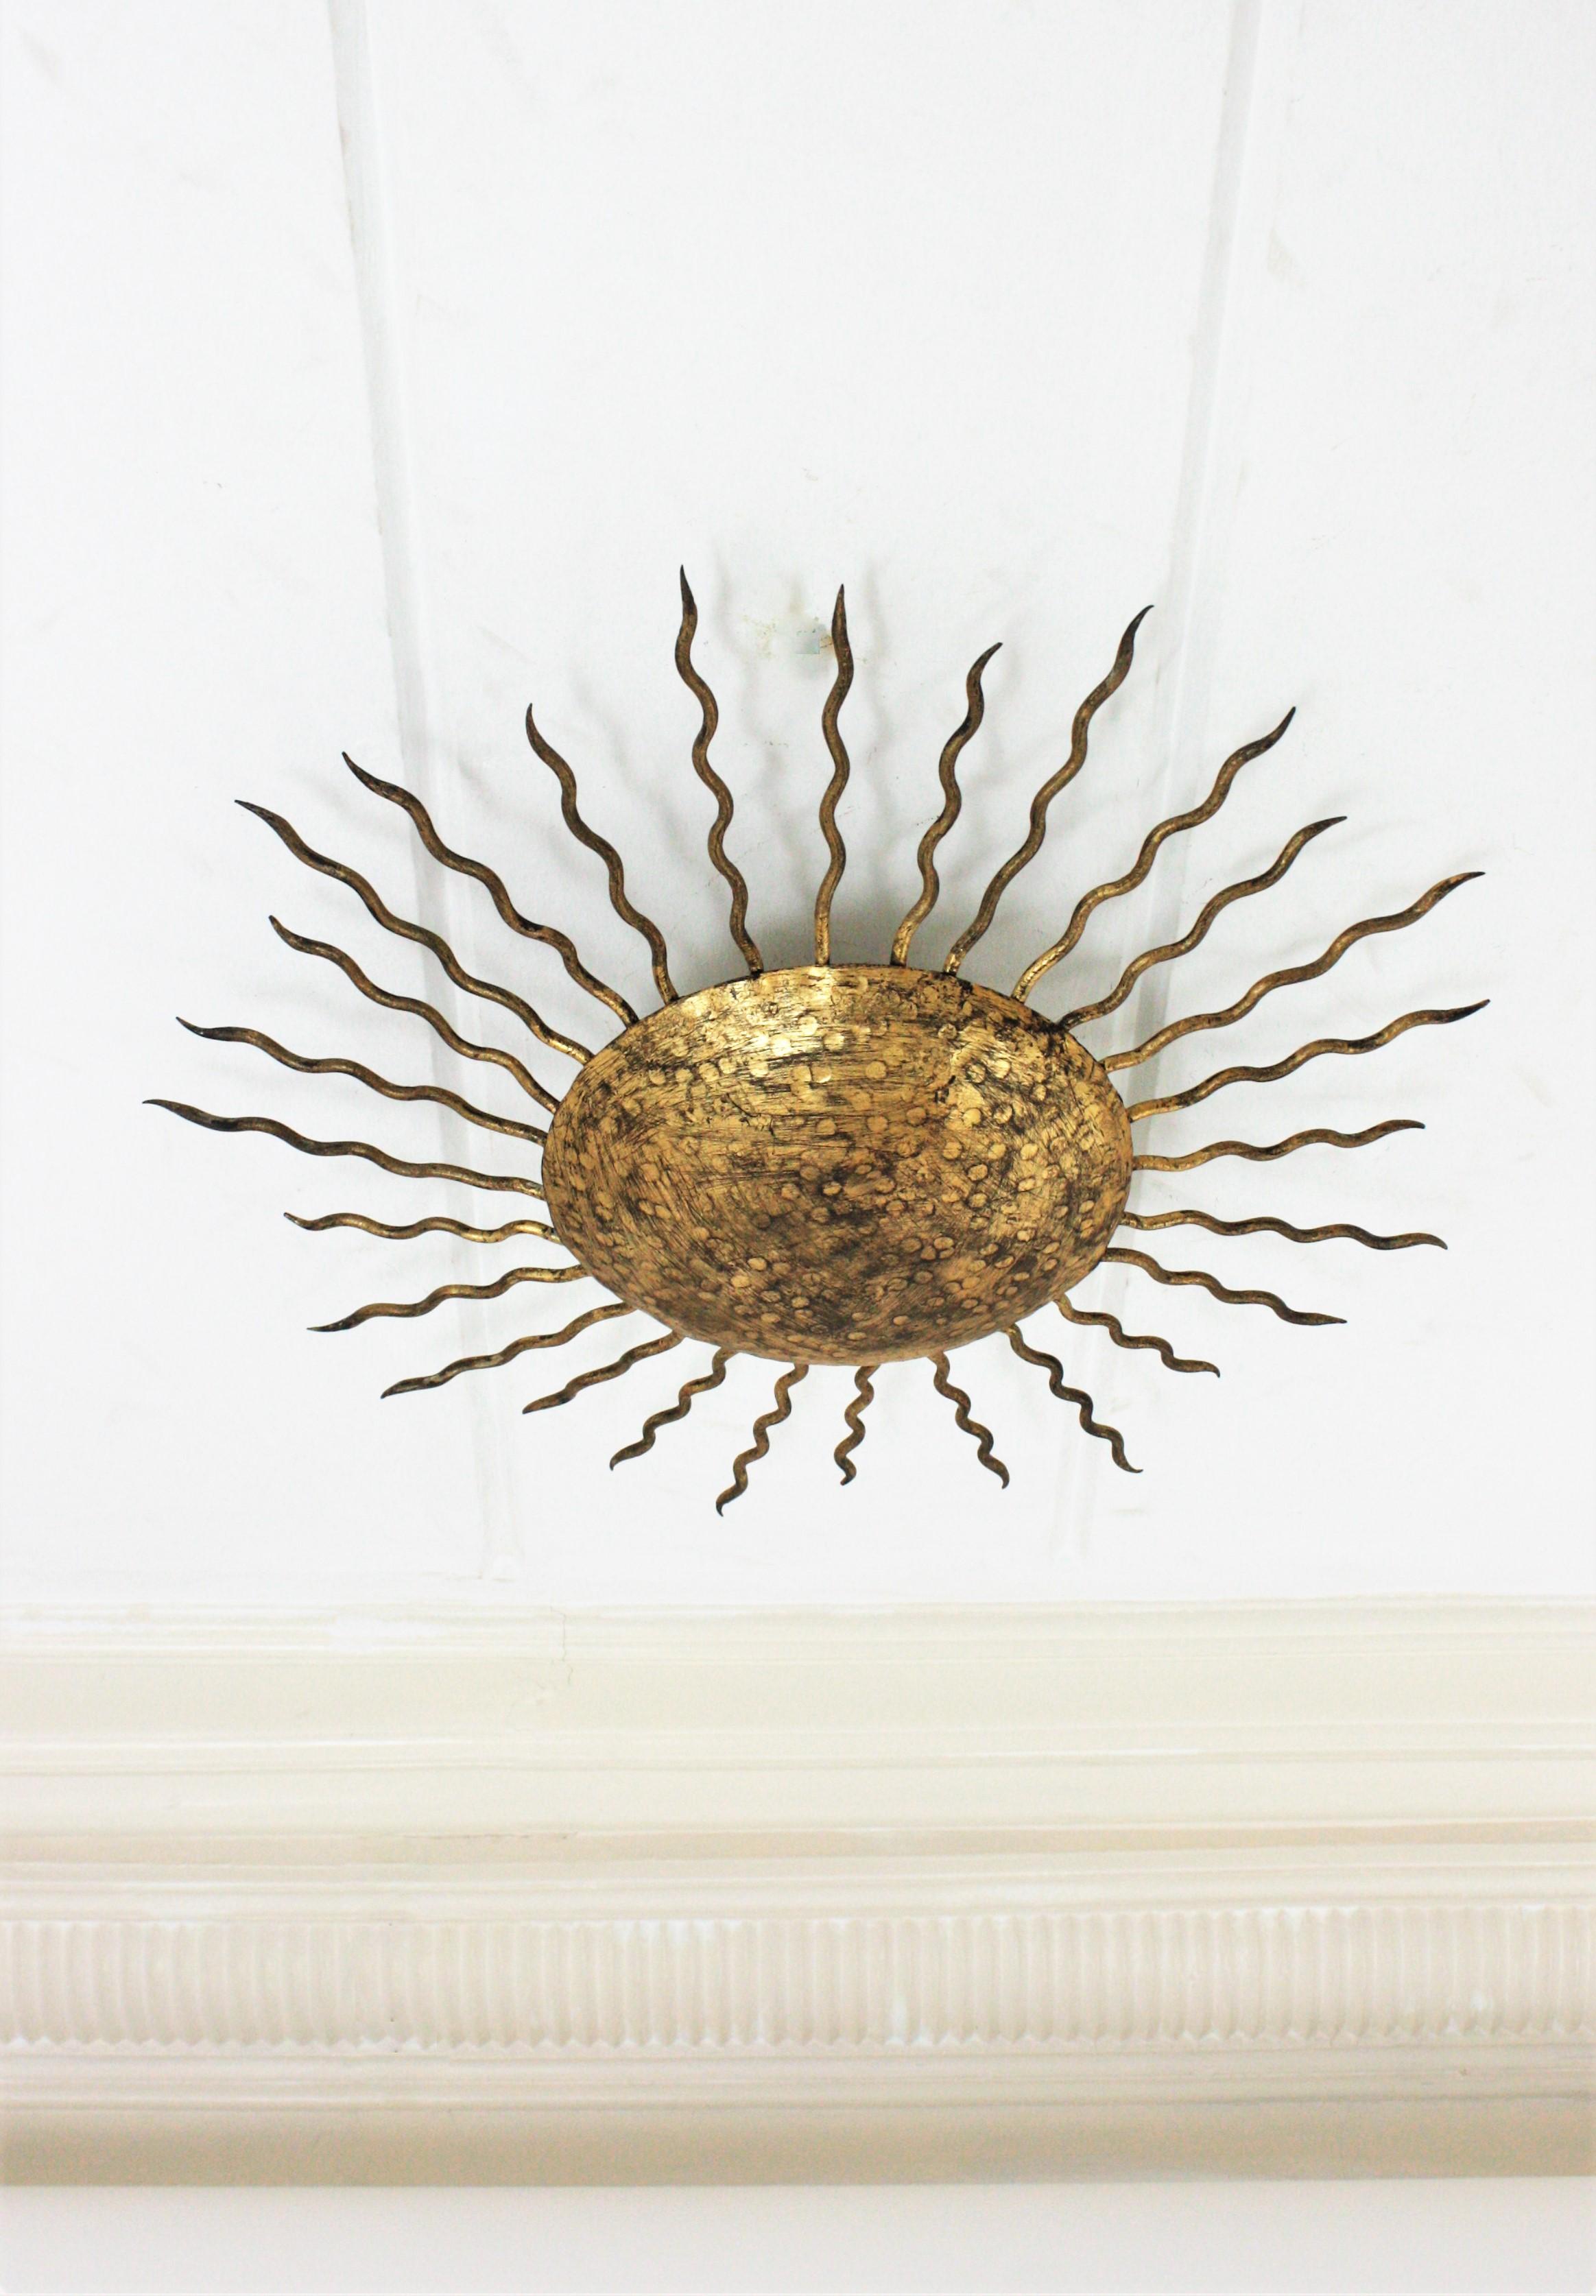 Large Sunburst Ceiling Light Fixture in Hand Hammered Gilt Iron, 1950s For Sale 2